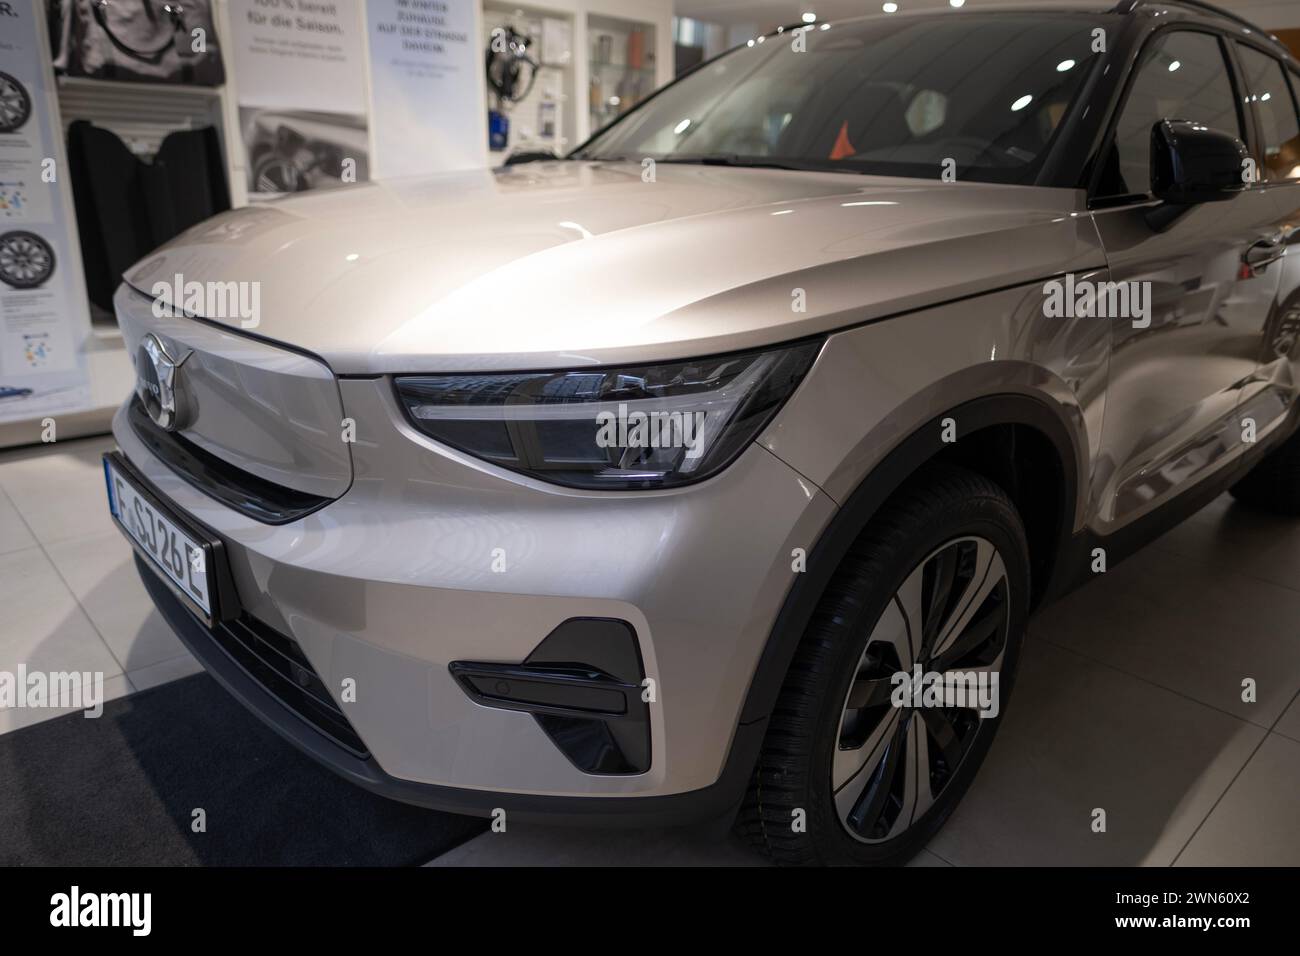 white new Volvo XC40 Recharge Electric Car, SUV crossover Swedish company Volvo Cars in showroom, EV in Europe, Innovation in automotive industry show Stock Photo